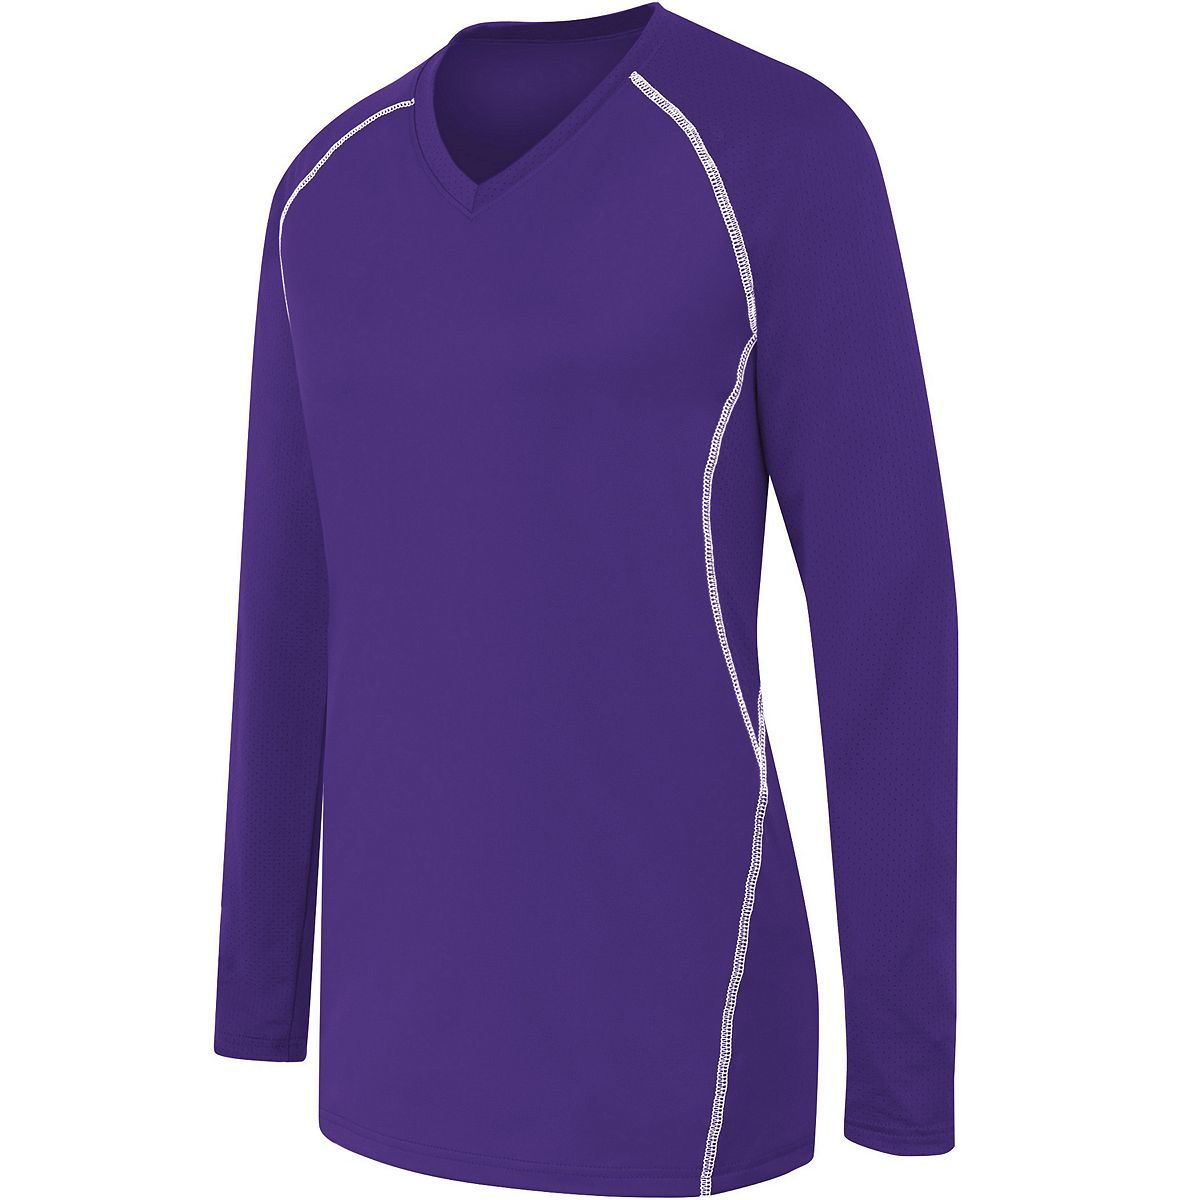 High 5 Girls Long Sleeve Solid Jersey in Purple/White  -Part of the Girls, High5-Products, Volleyball, Girls-Jersey, Shirts product lines at KanaleyCreations.com